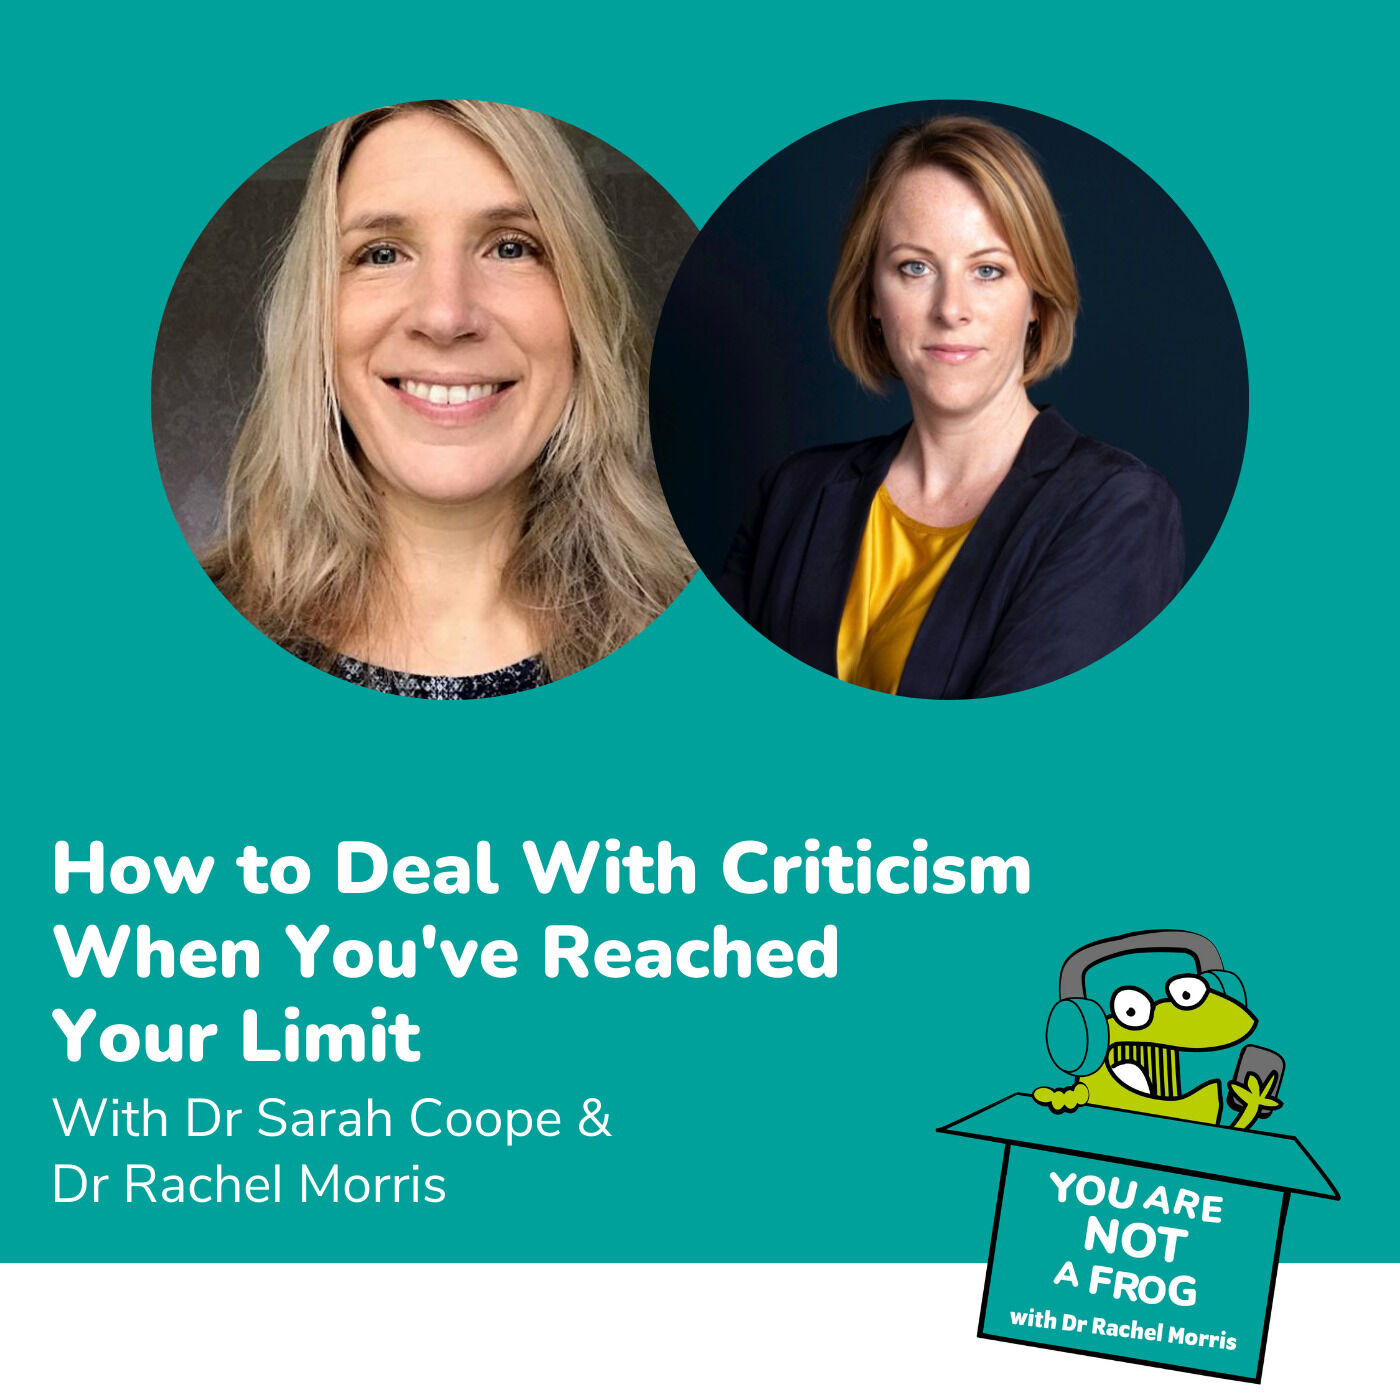 How to Deal With Criticism When You’ve Reached Your Limit